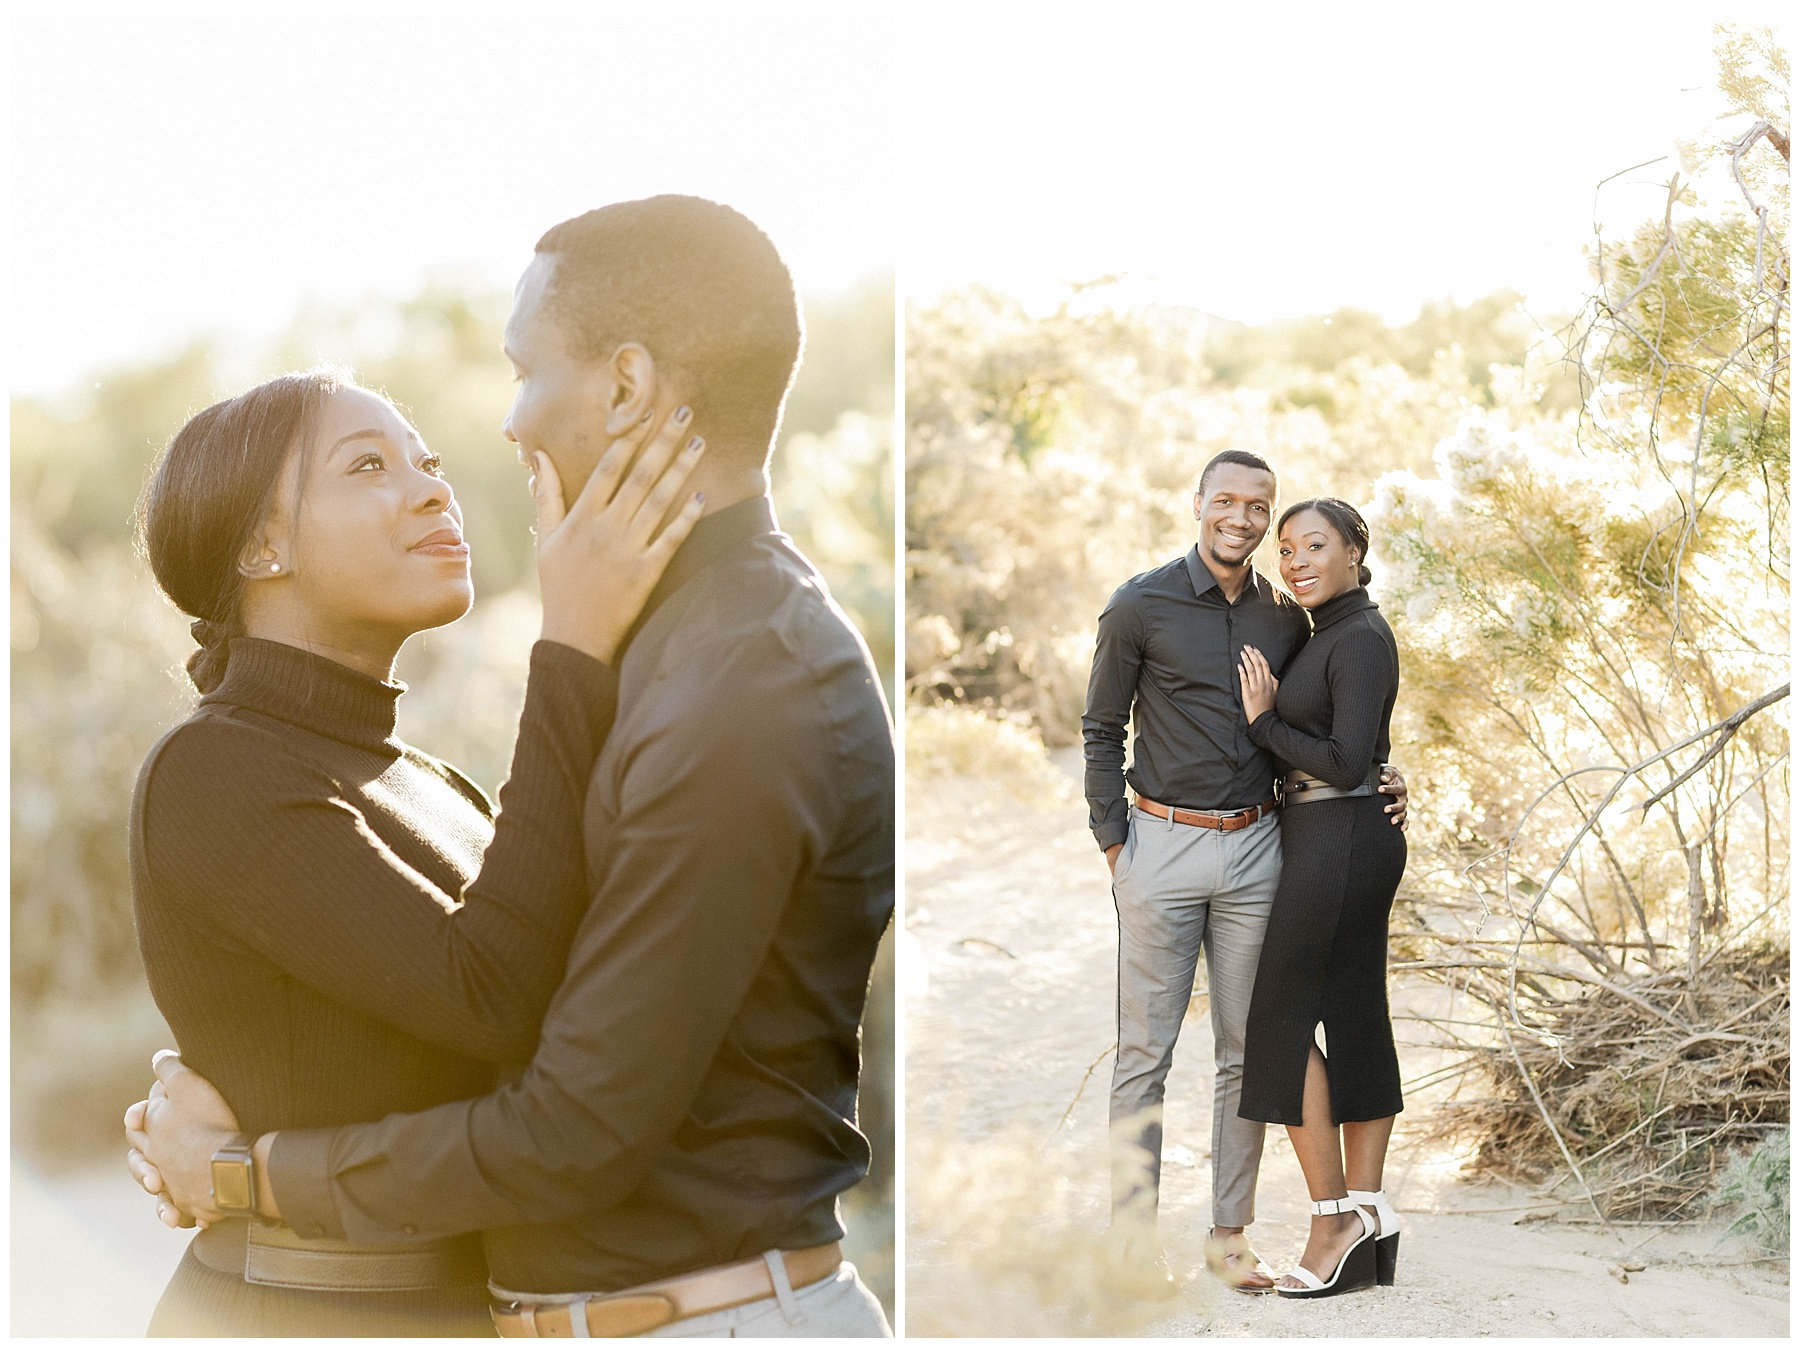 Tucson Couples Photography Session at Honeybee Canyon